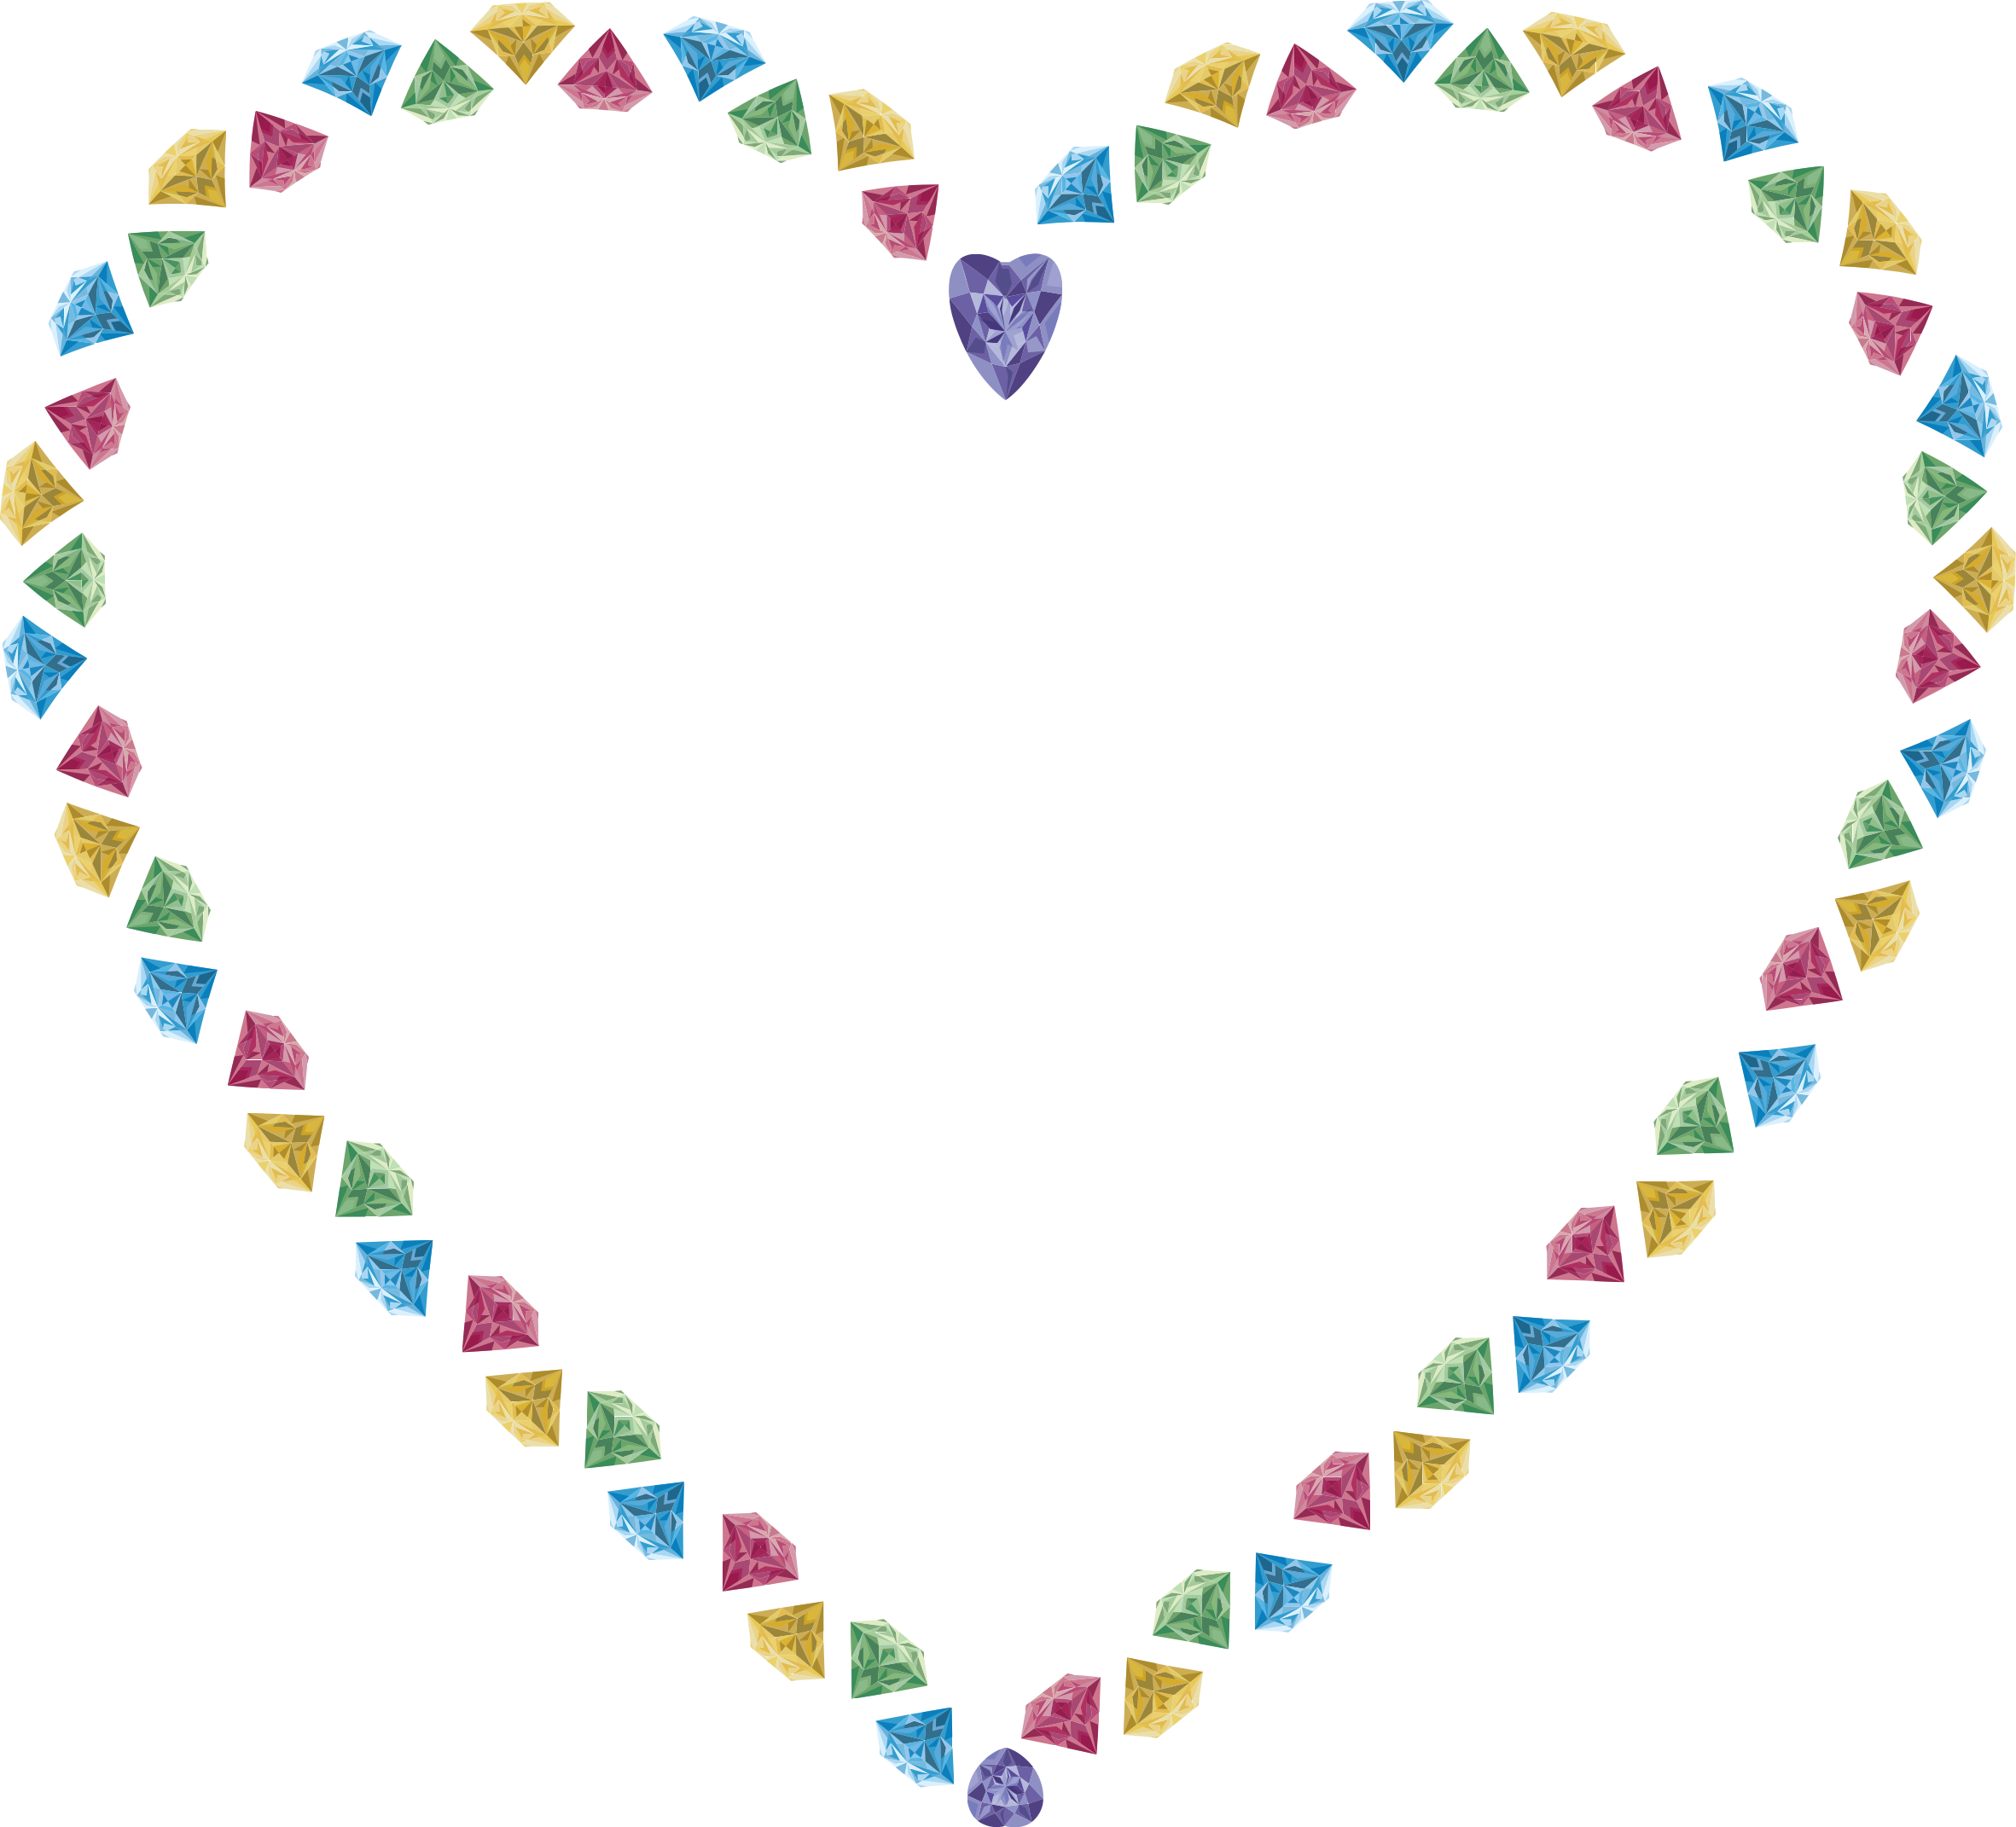 Gemstones heart icons png. Hearts clipart gem